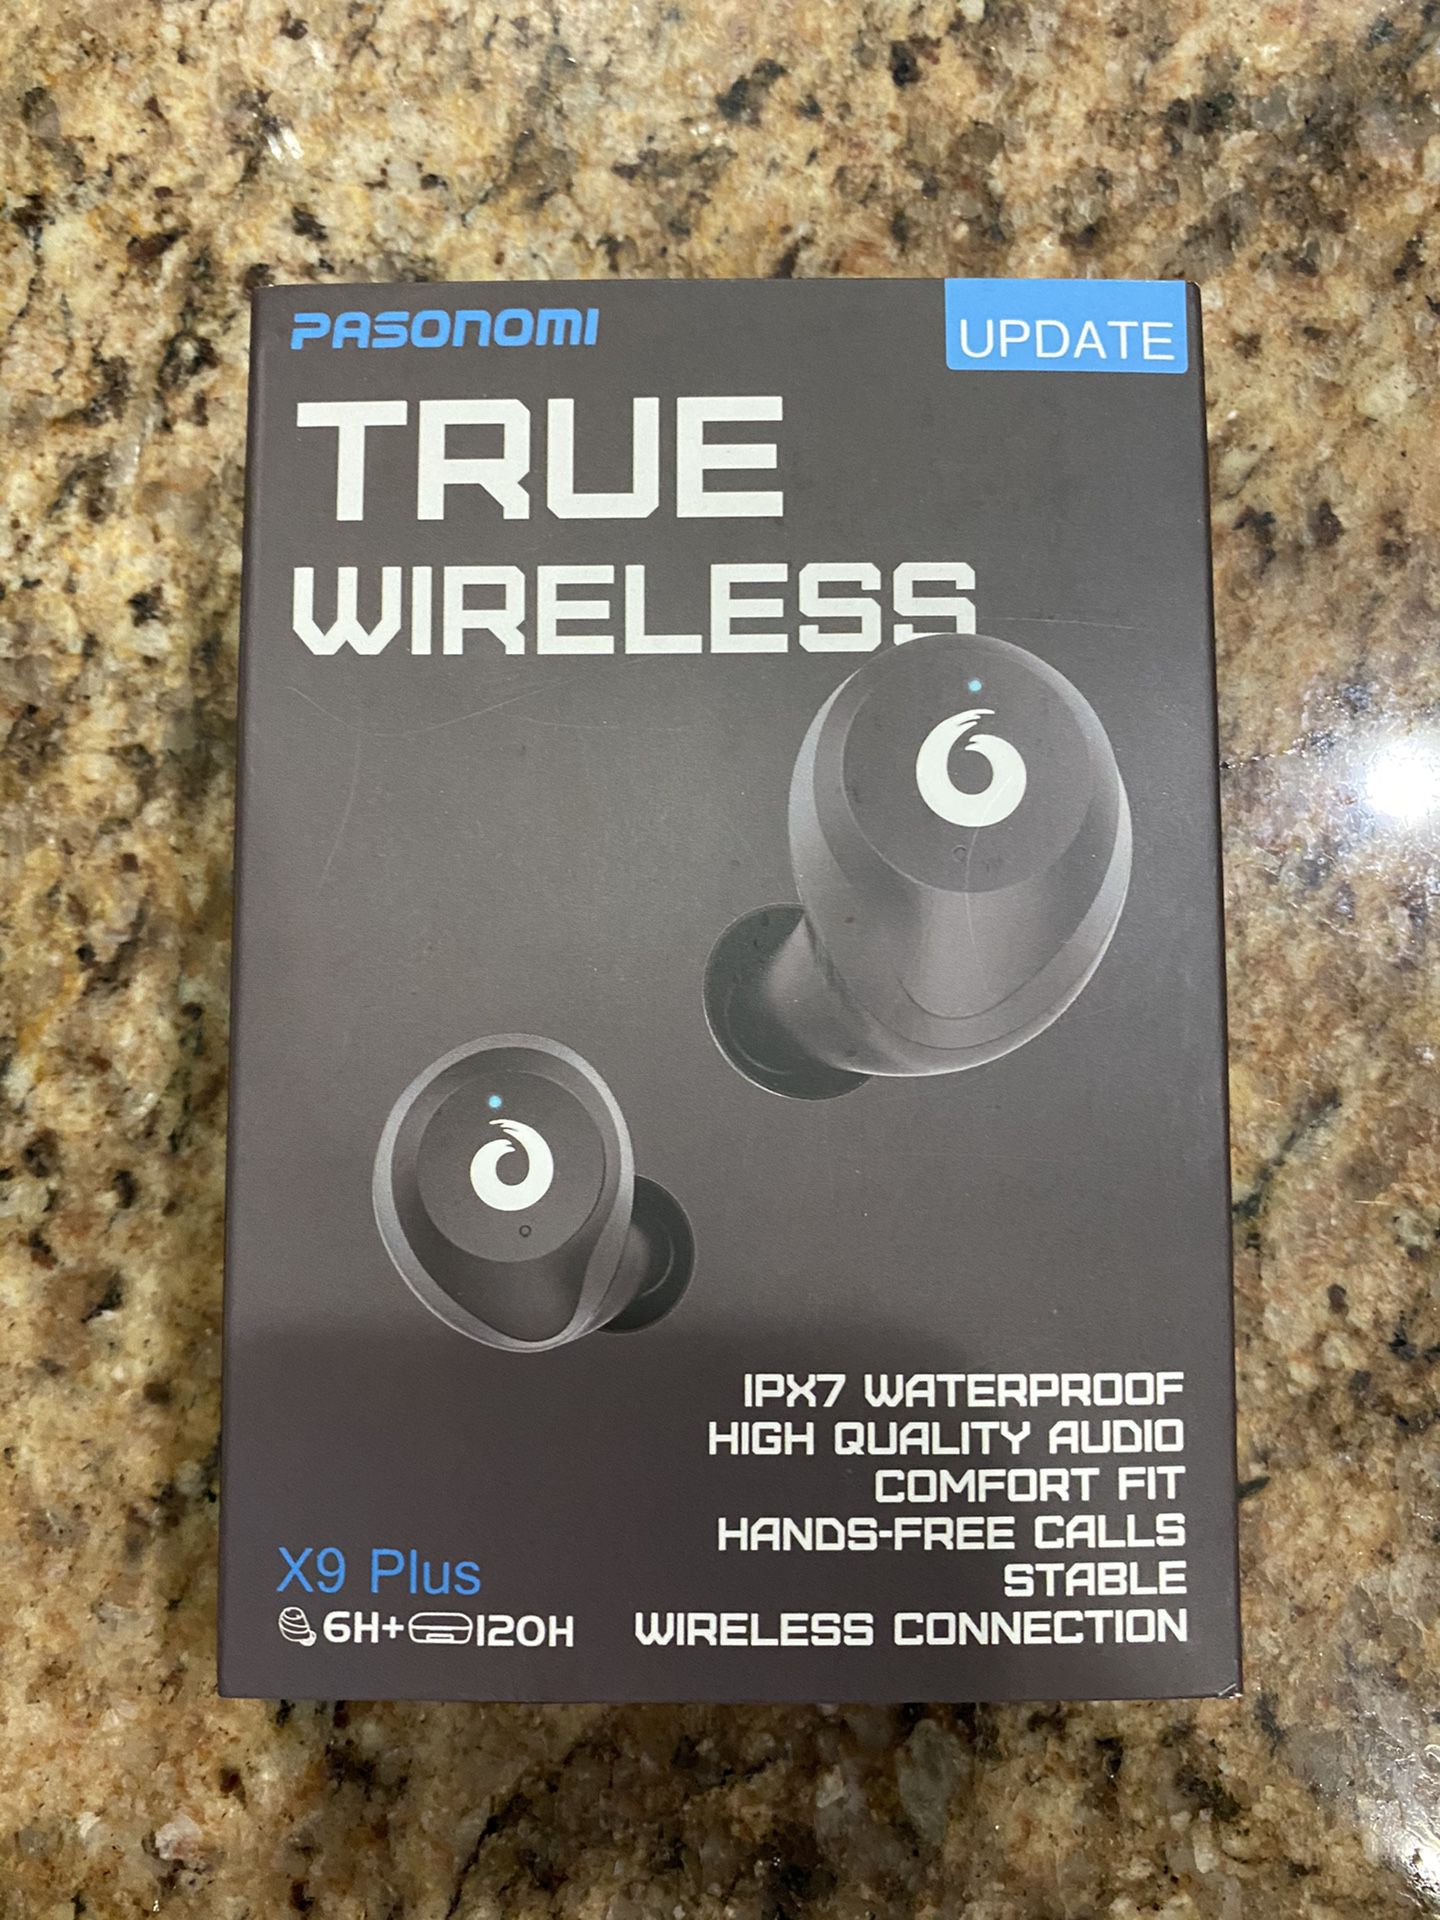 Wireless Earbuds TWS Bluetooth Earbuds Stereo Bluetooth 5.0 Headphones Sports IPX7 Waterproof Wireless Earphones with 2200mah Charging Case/Box, Buil